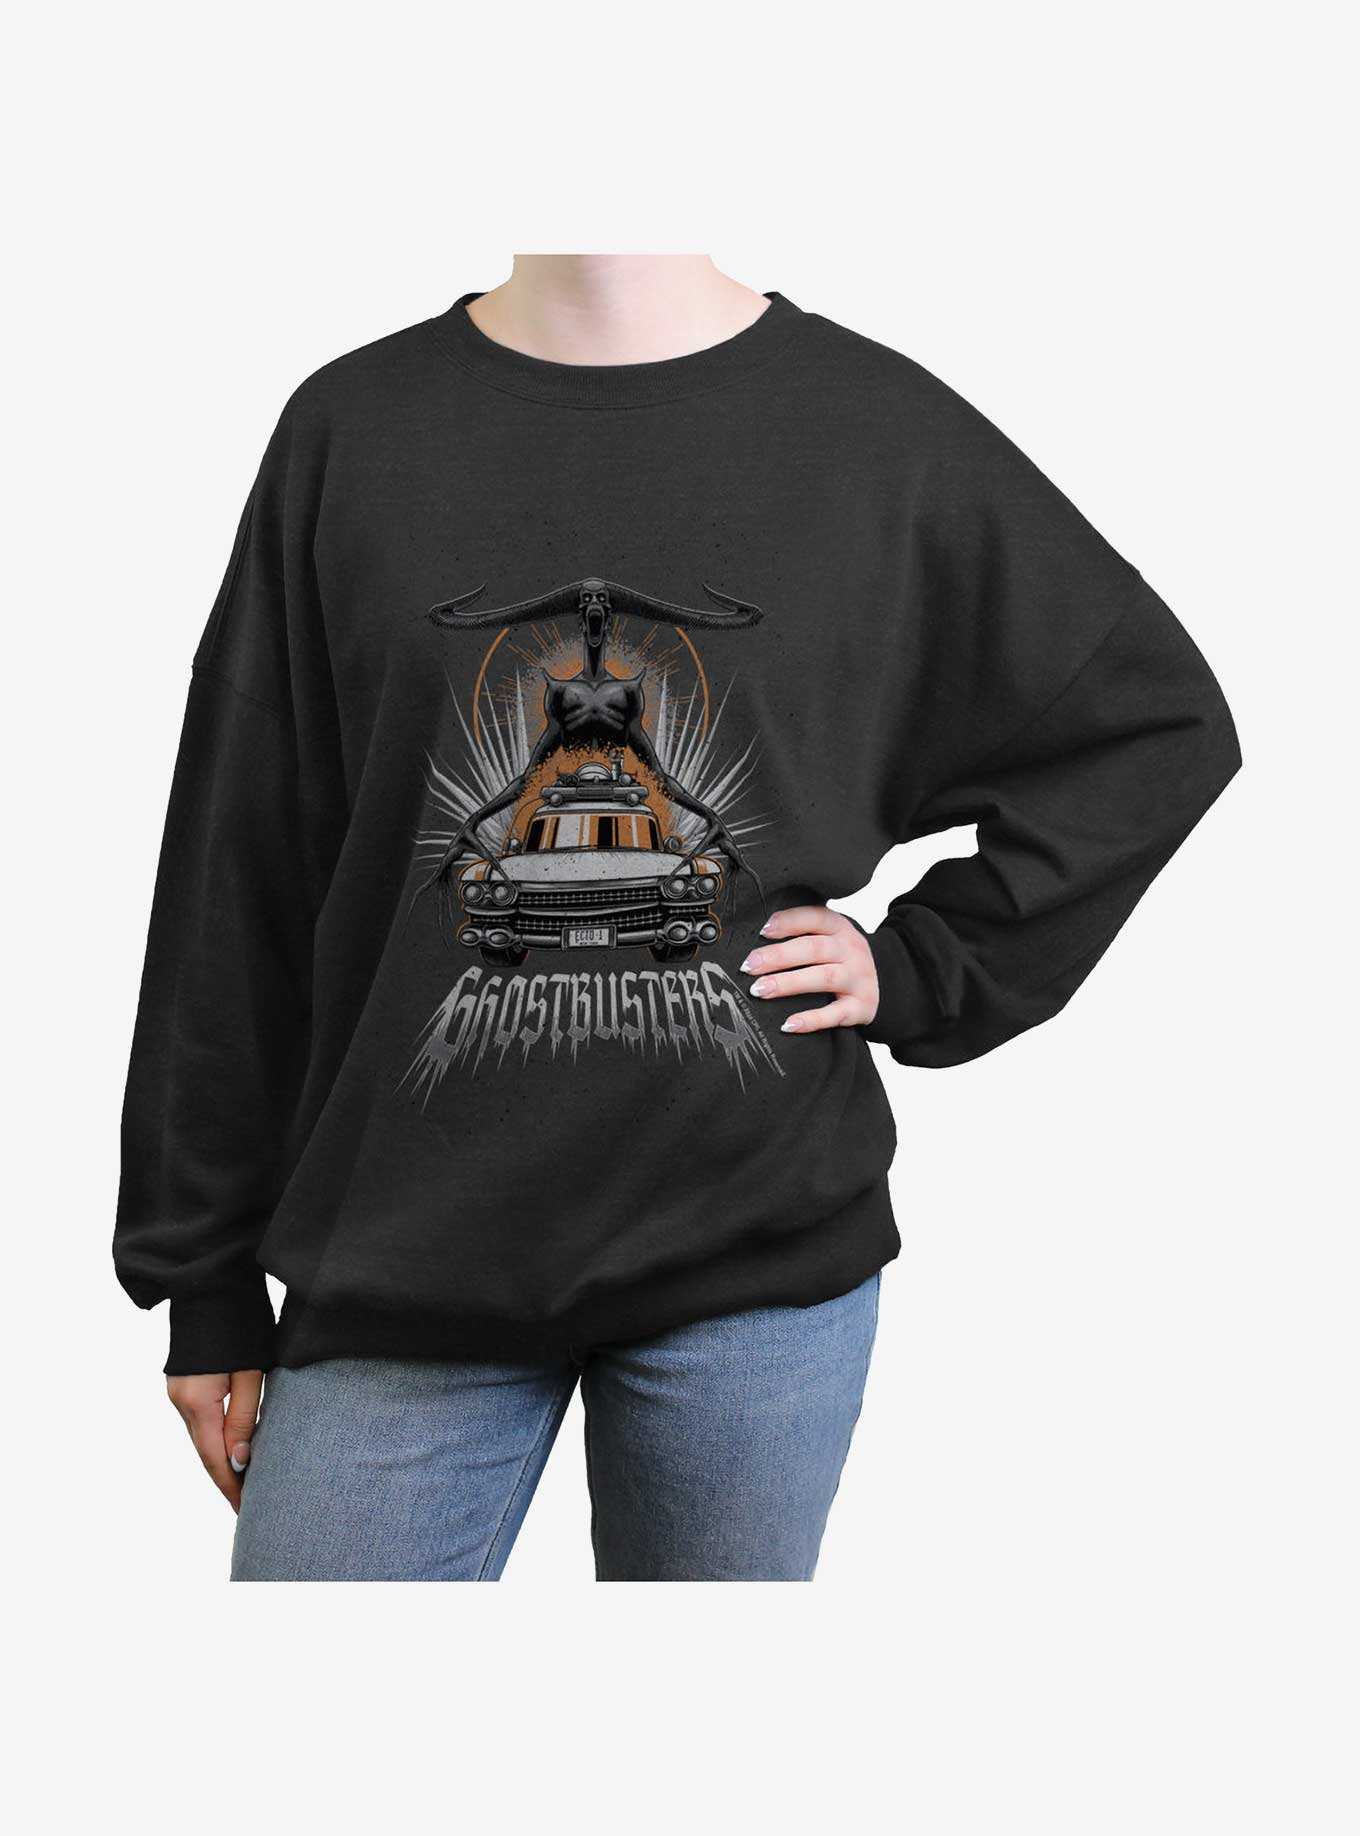 Ghostbusters Tall Dark and Horny at 12 o'clock Girls Oversized Sweatshirt, , hi-res